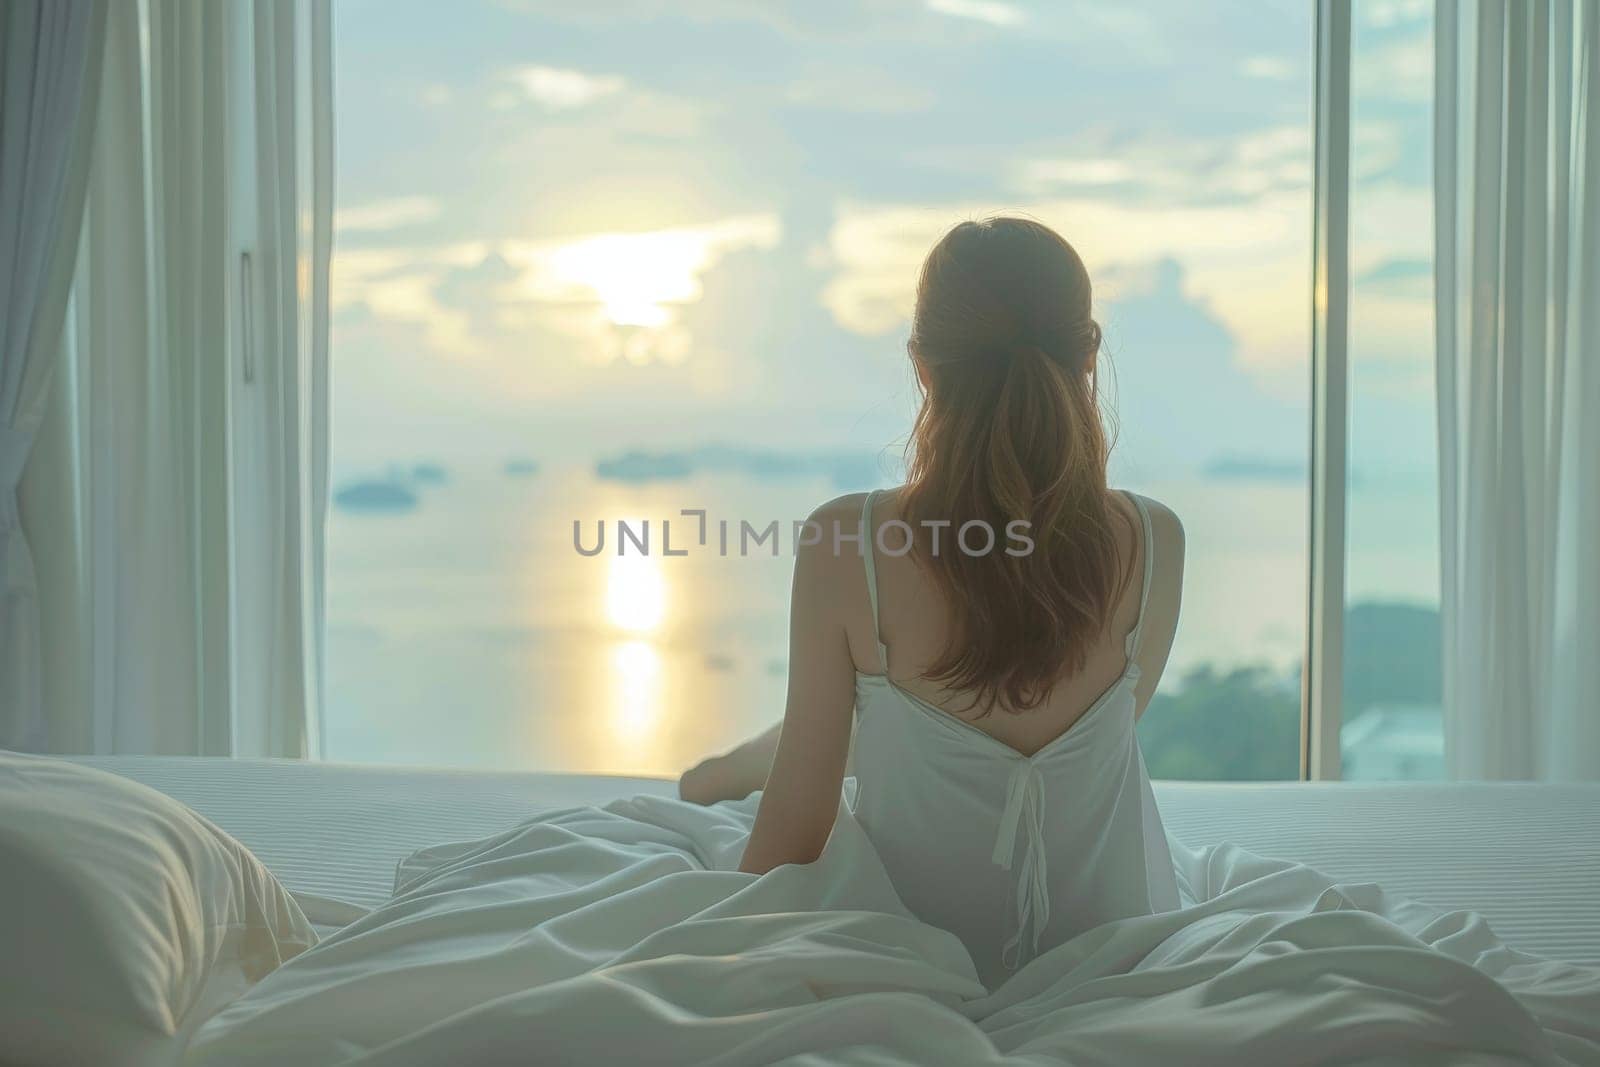 A woman is sitting on a bed with her back to the camera. She is wearing a white robe and she is relaxed. The room has large windows that let in natural light